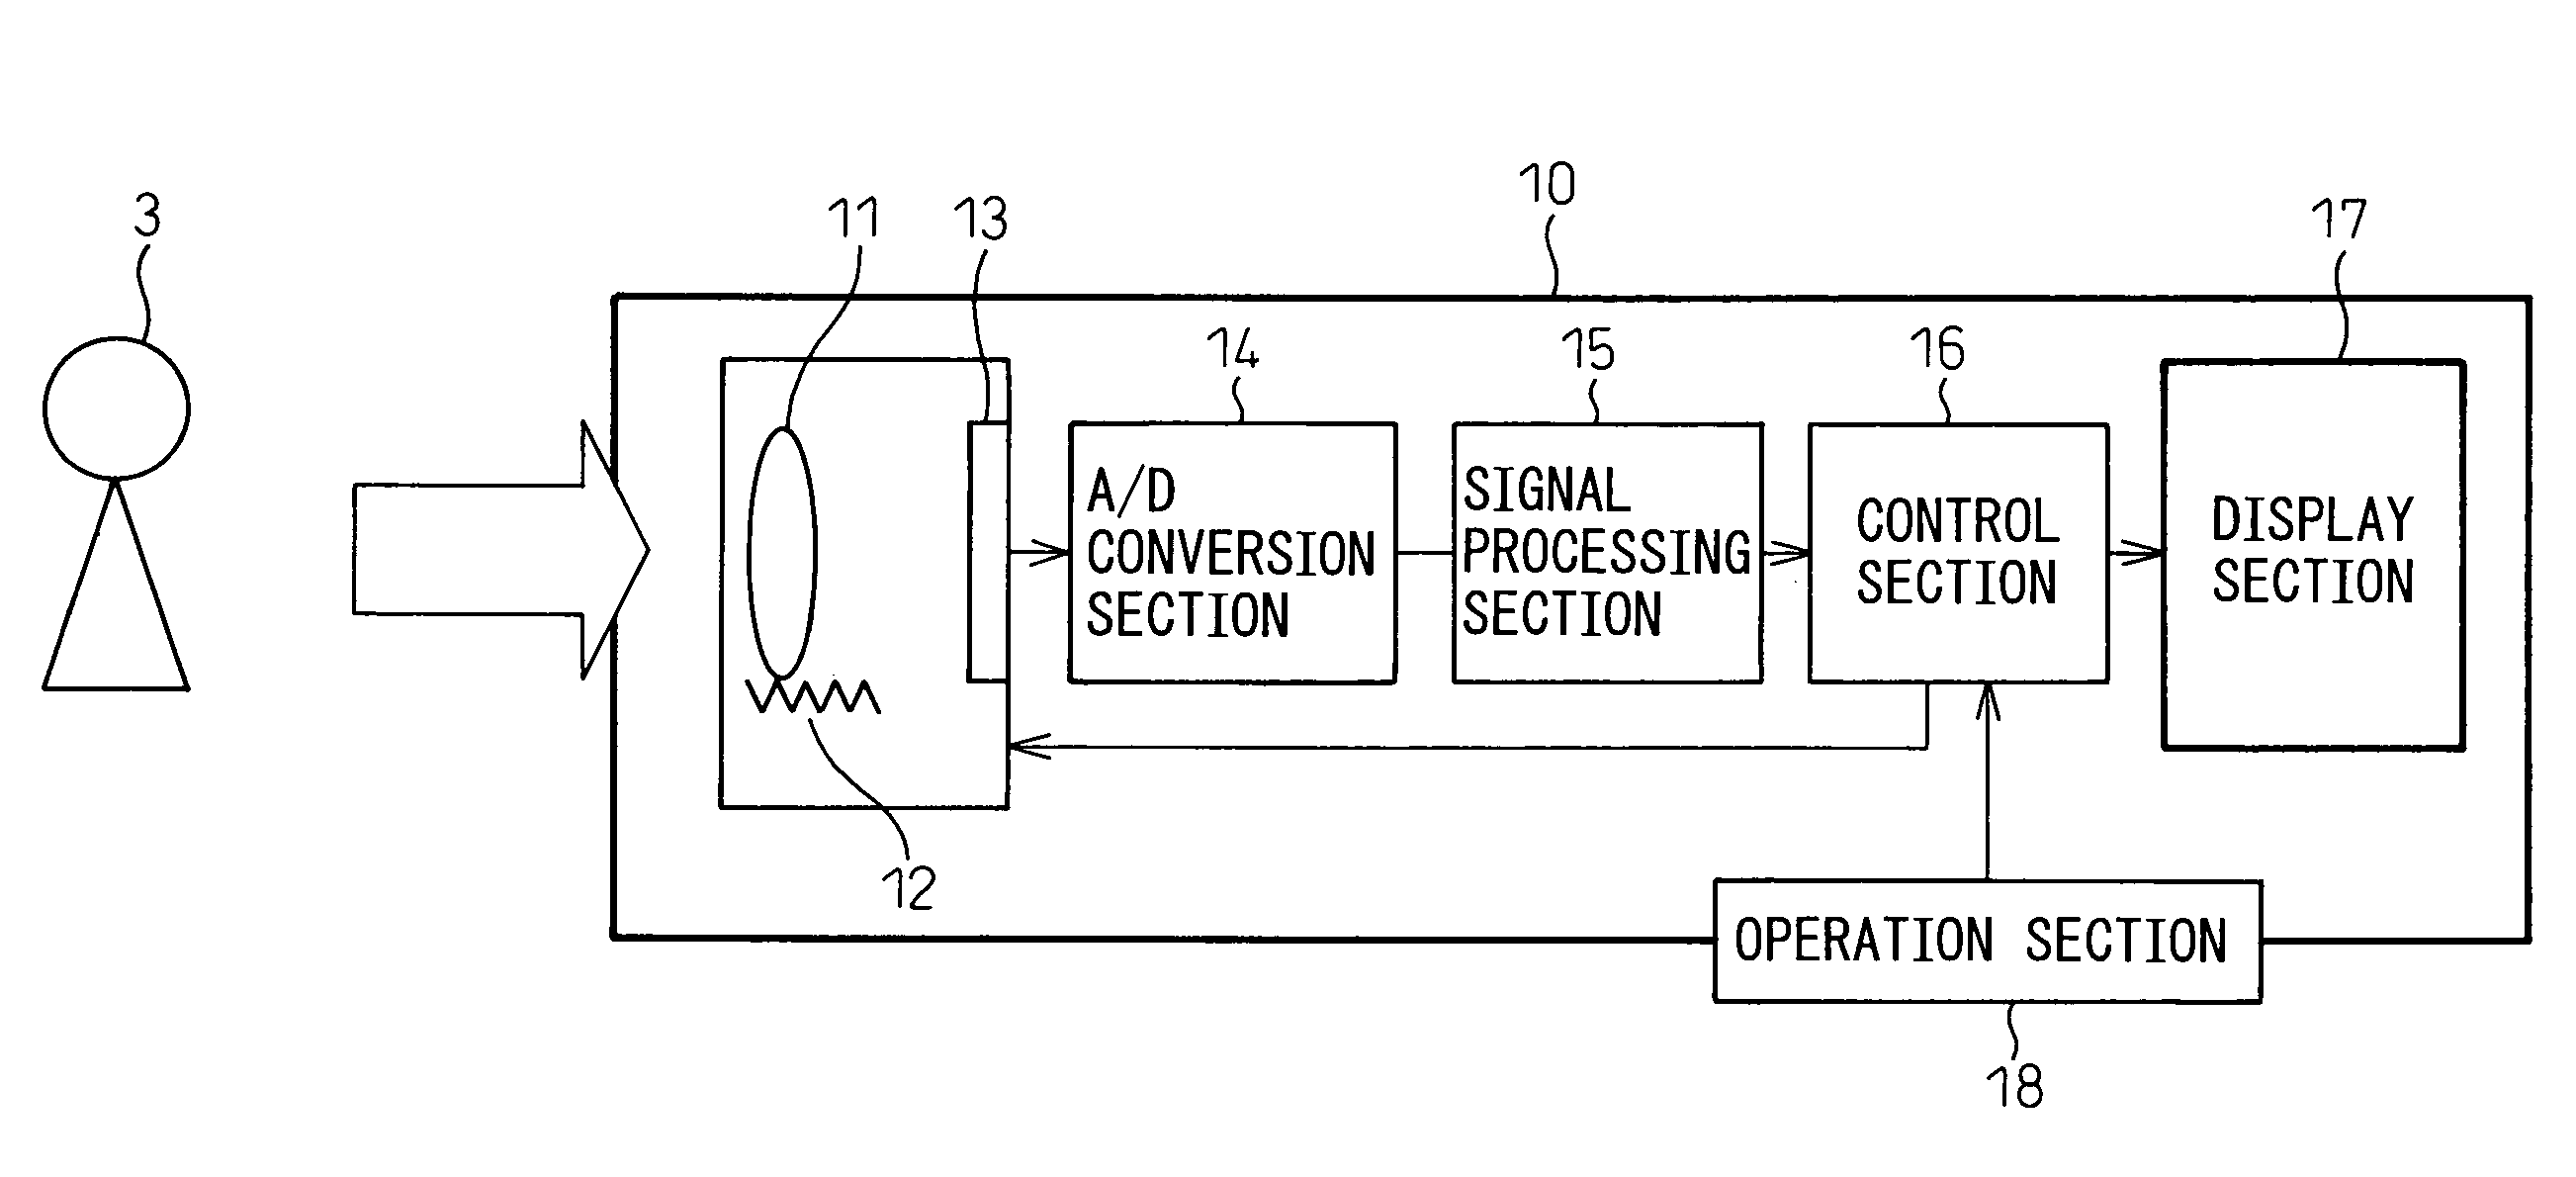 Imaging apparatus with AF optical zoom